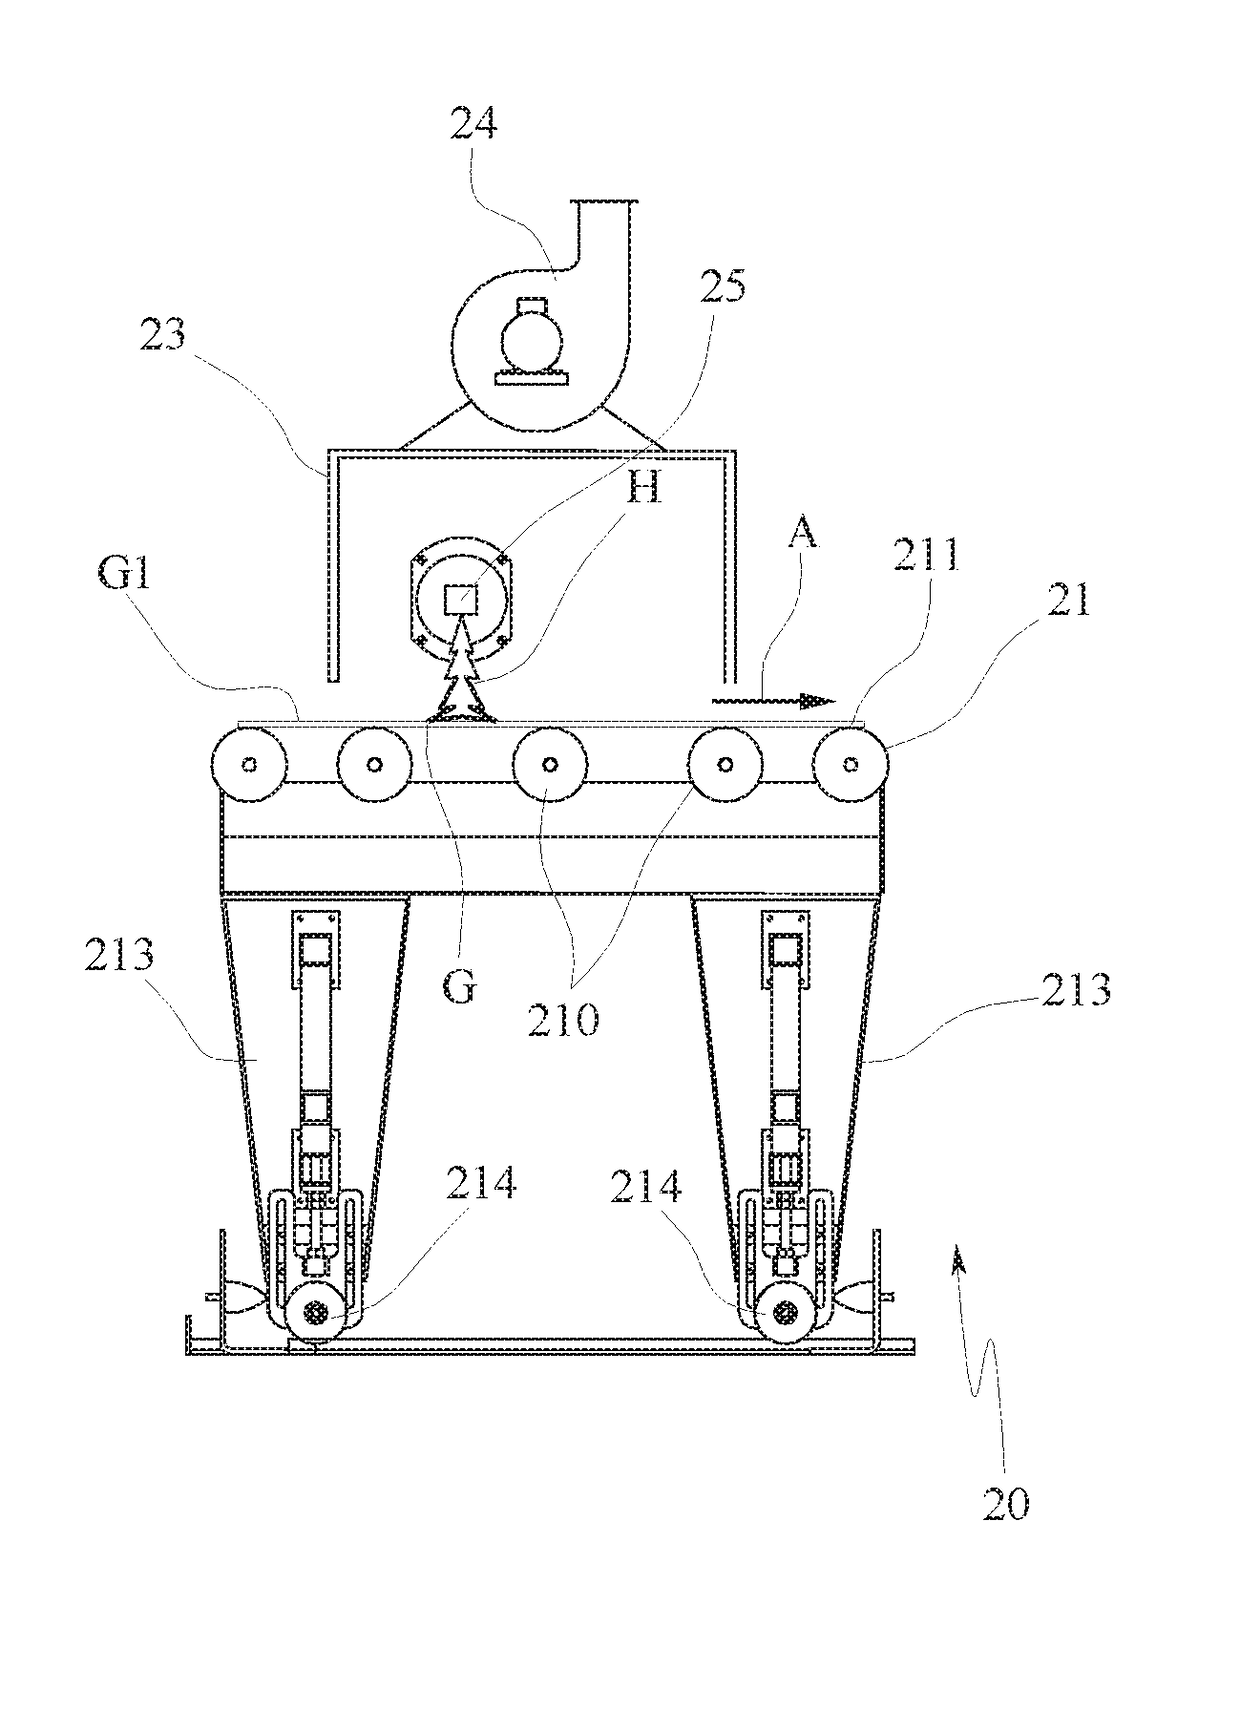 Machine and method for cleaning glass articles